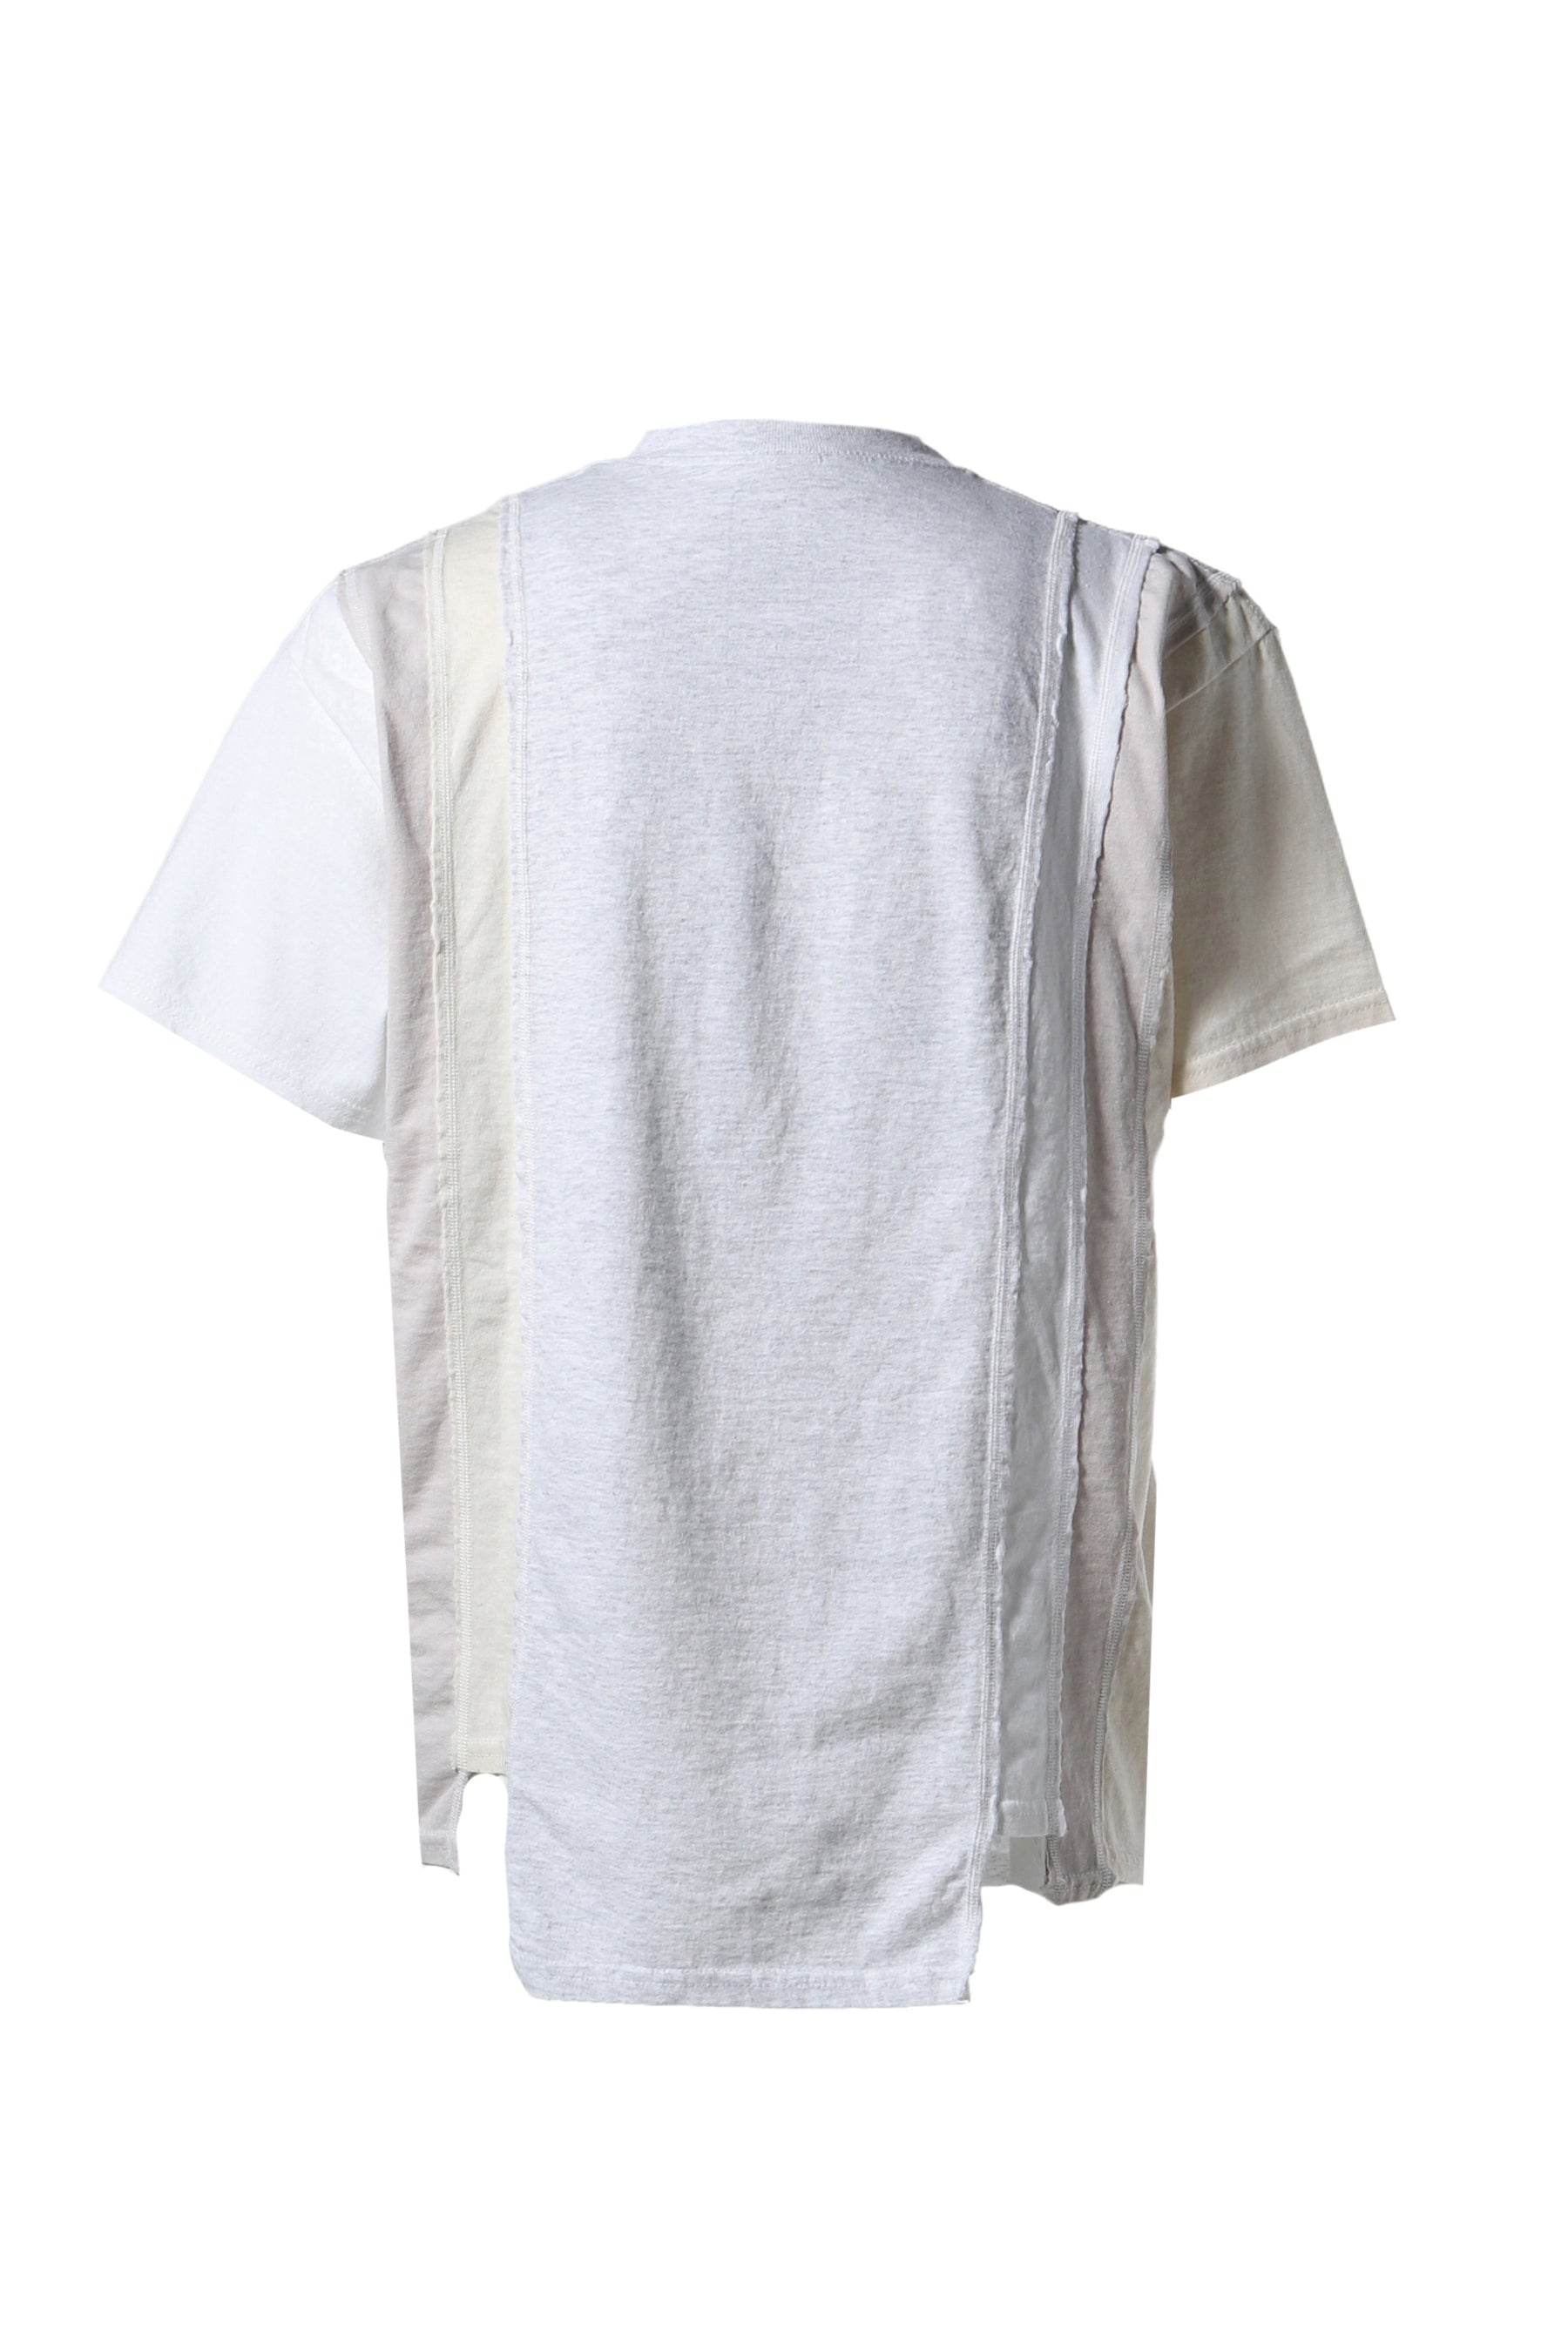 7 CUTS S/S TEE - SOLID / FADE / IVORY